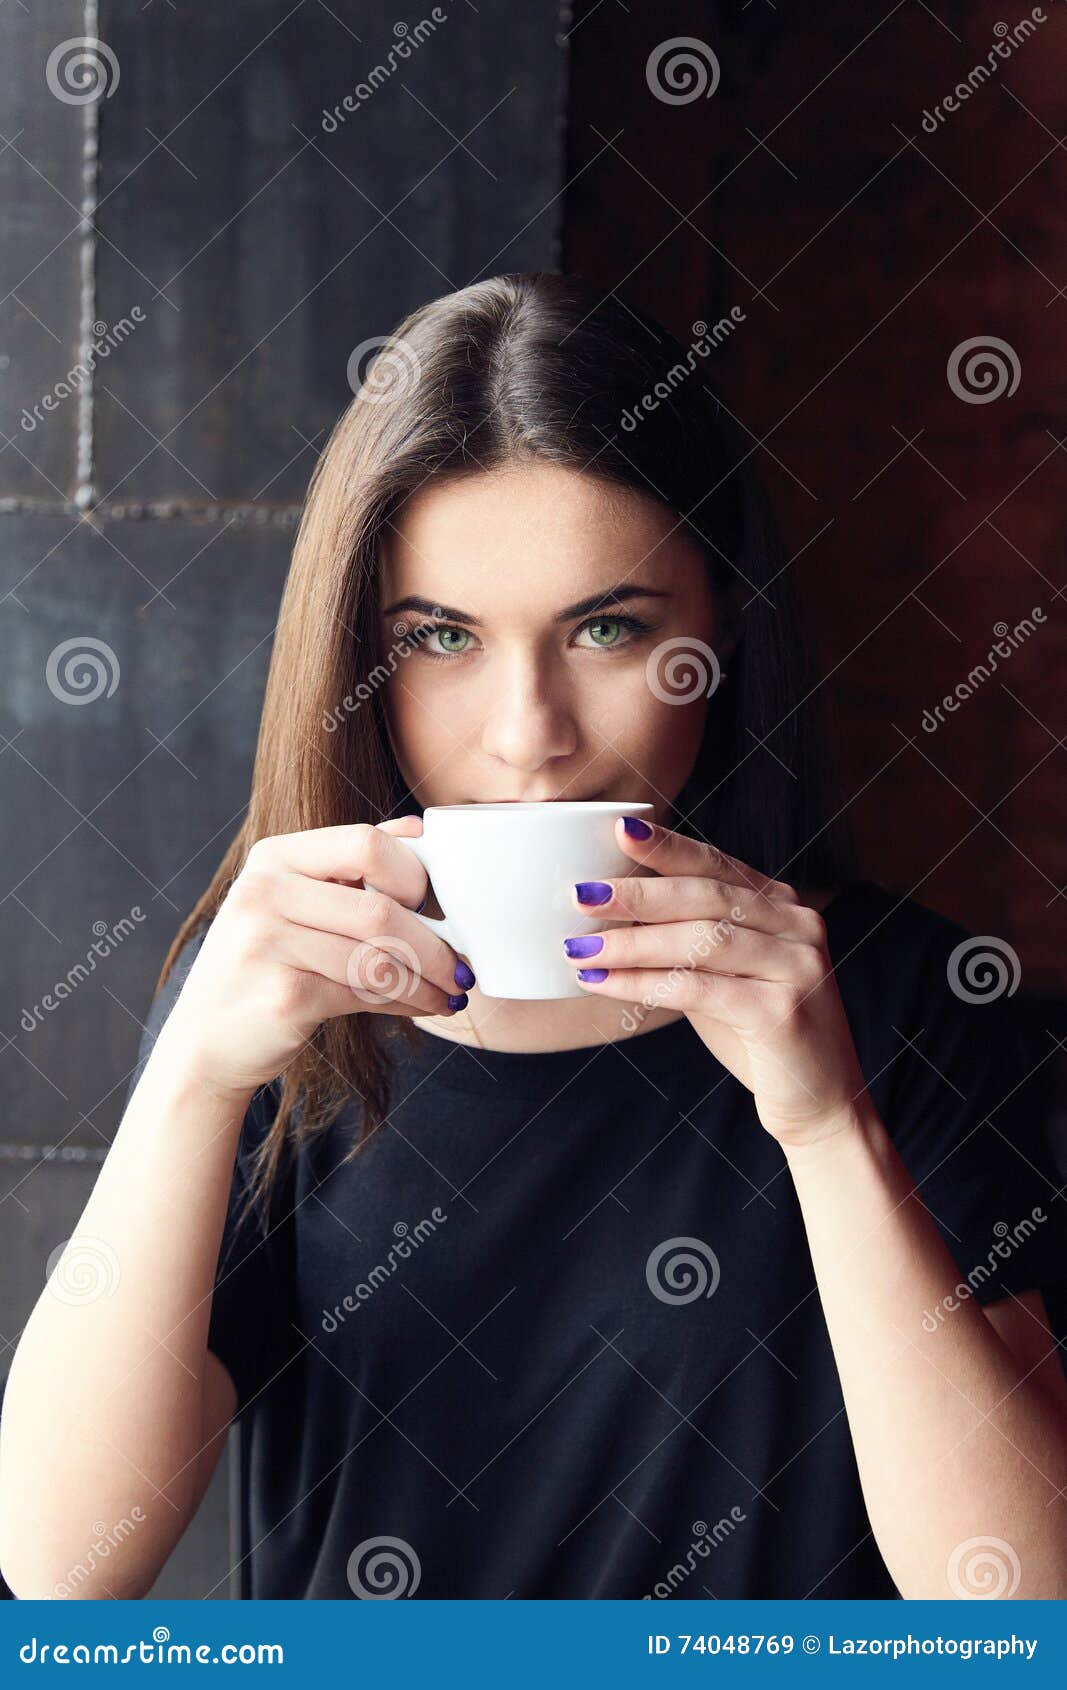 Thoughtfully In A Cafe With A Cup Of Coffee Stock Image ...
